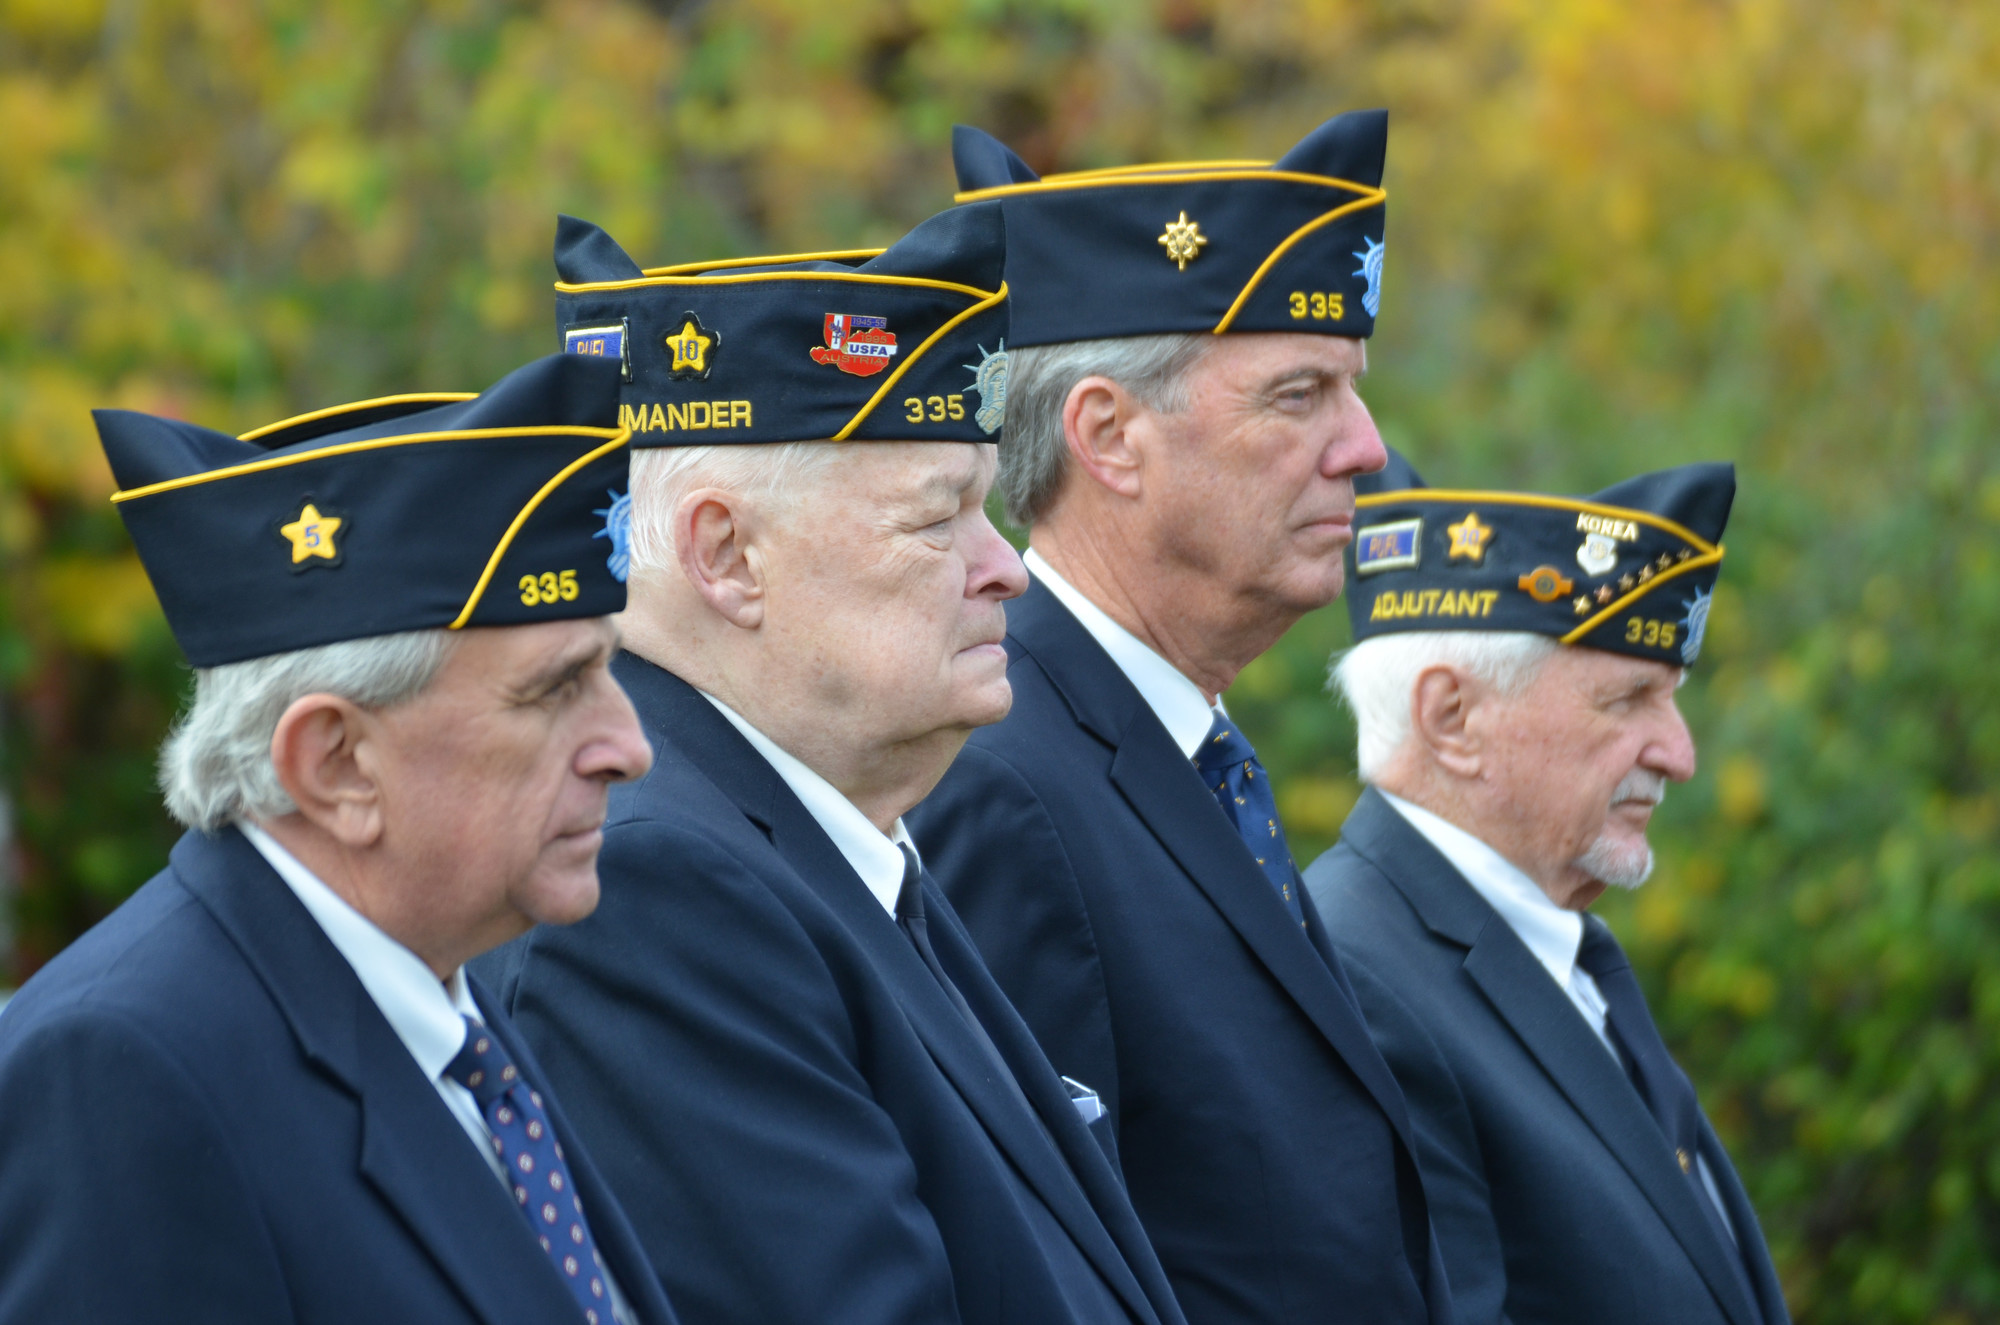 Lynbrook American Legion members gathered to reflect on the shared experience of war at the Doughboy Monument this Veterans Day. From left to right: Bill Geier, Henry Speicher, Steve Grogan and Jack Barlow.